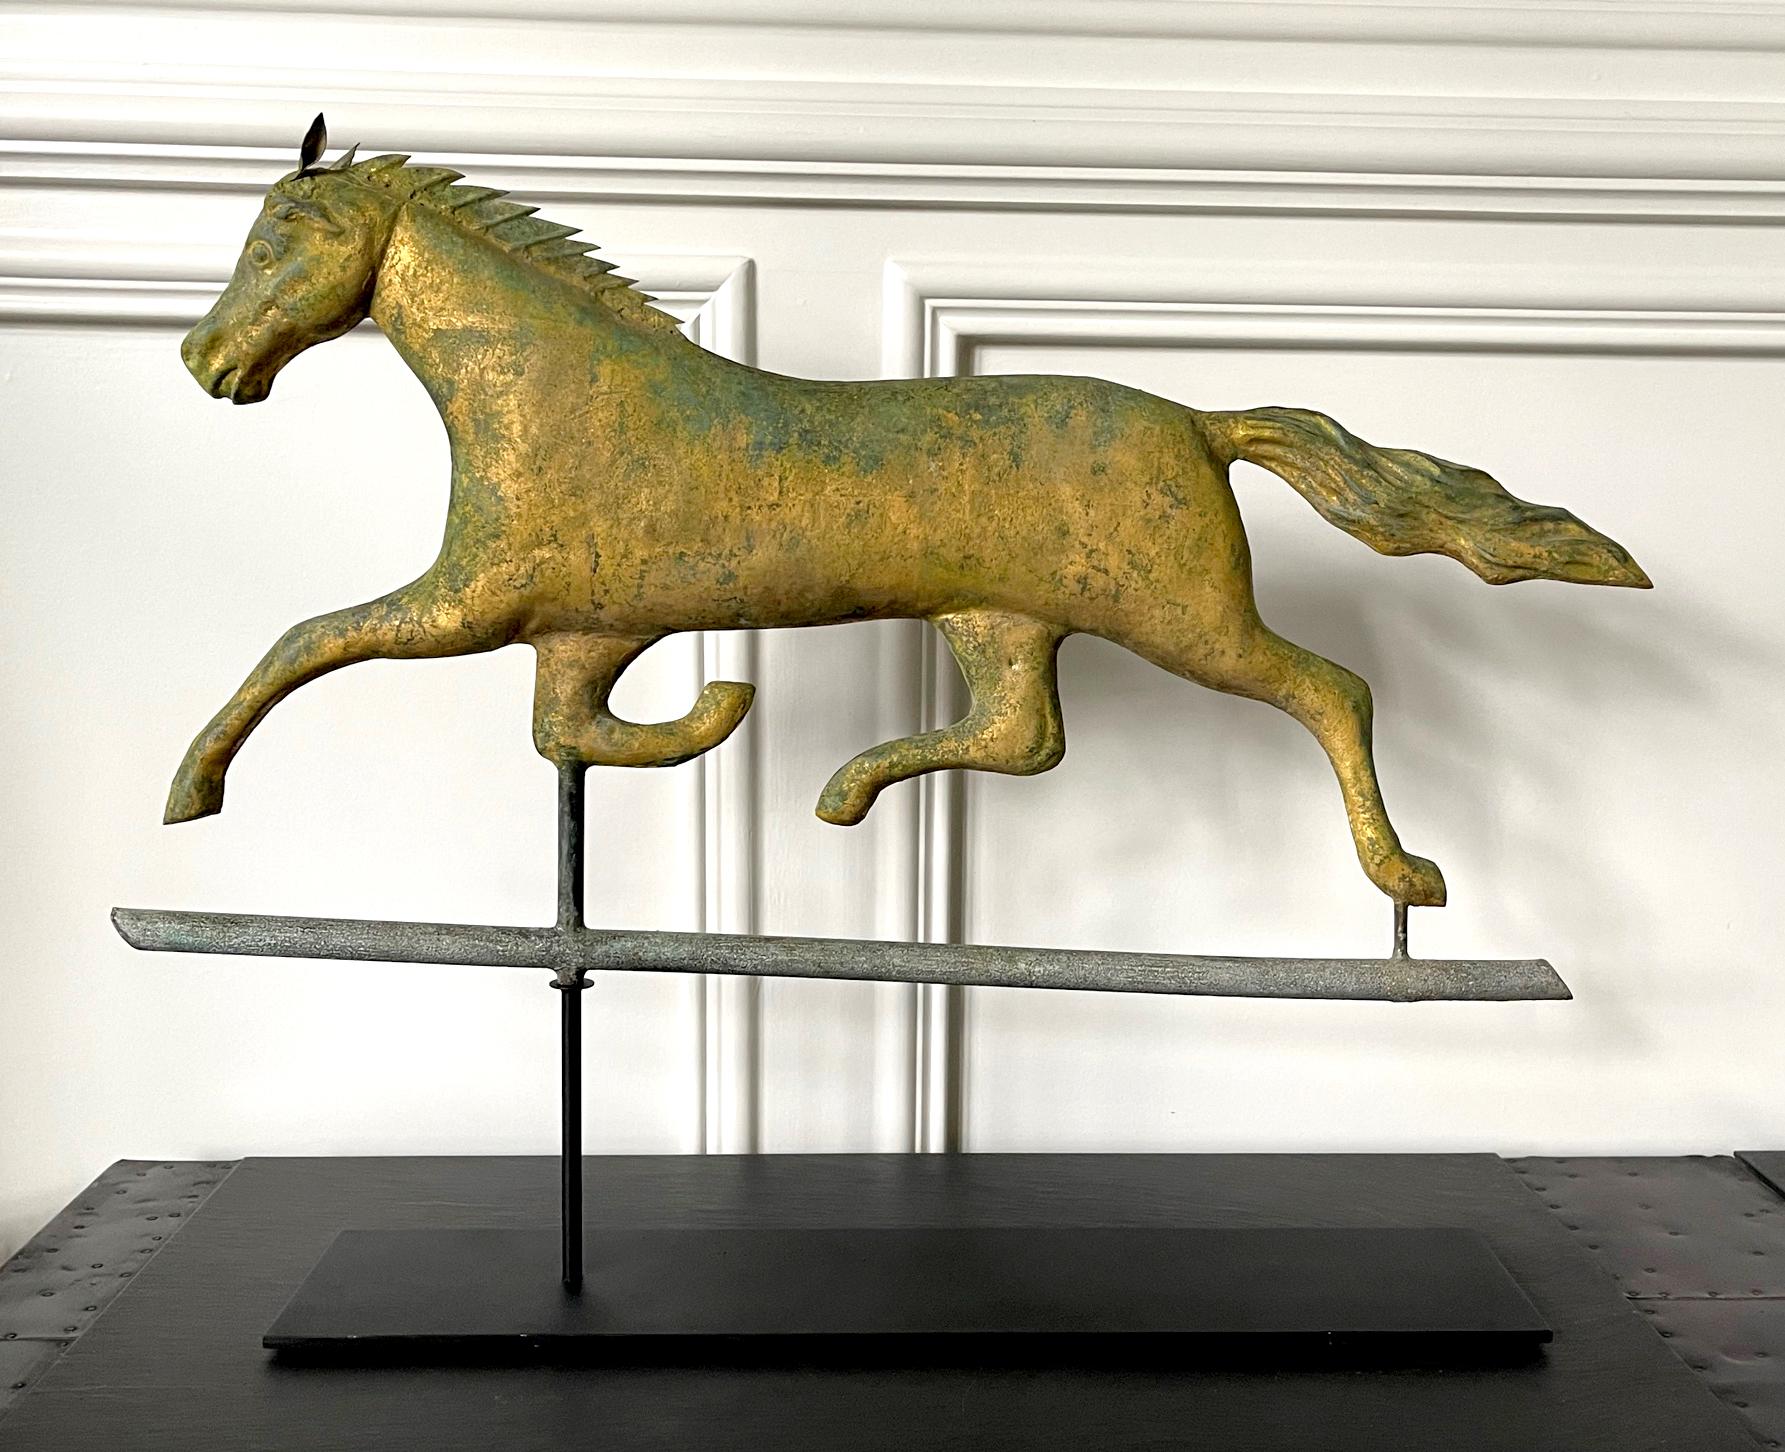 A weathervane in the form of a running horse, that was likely modeled after 